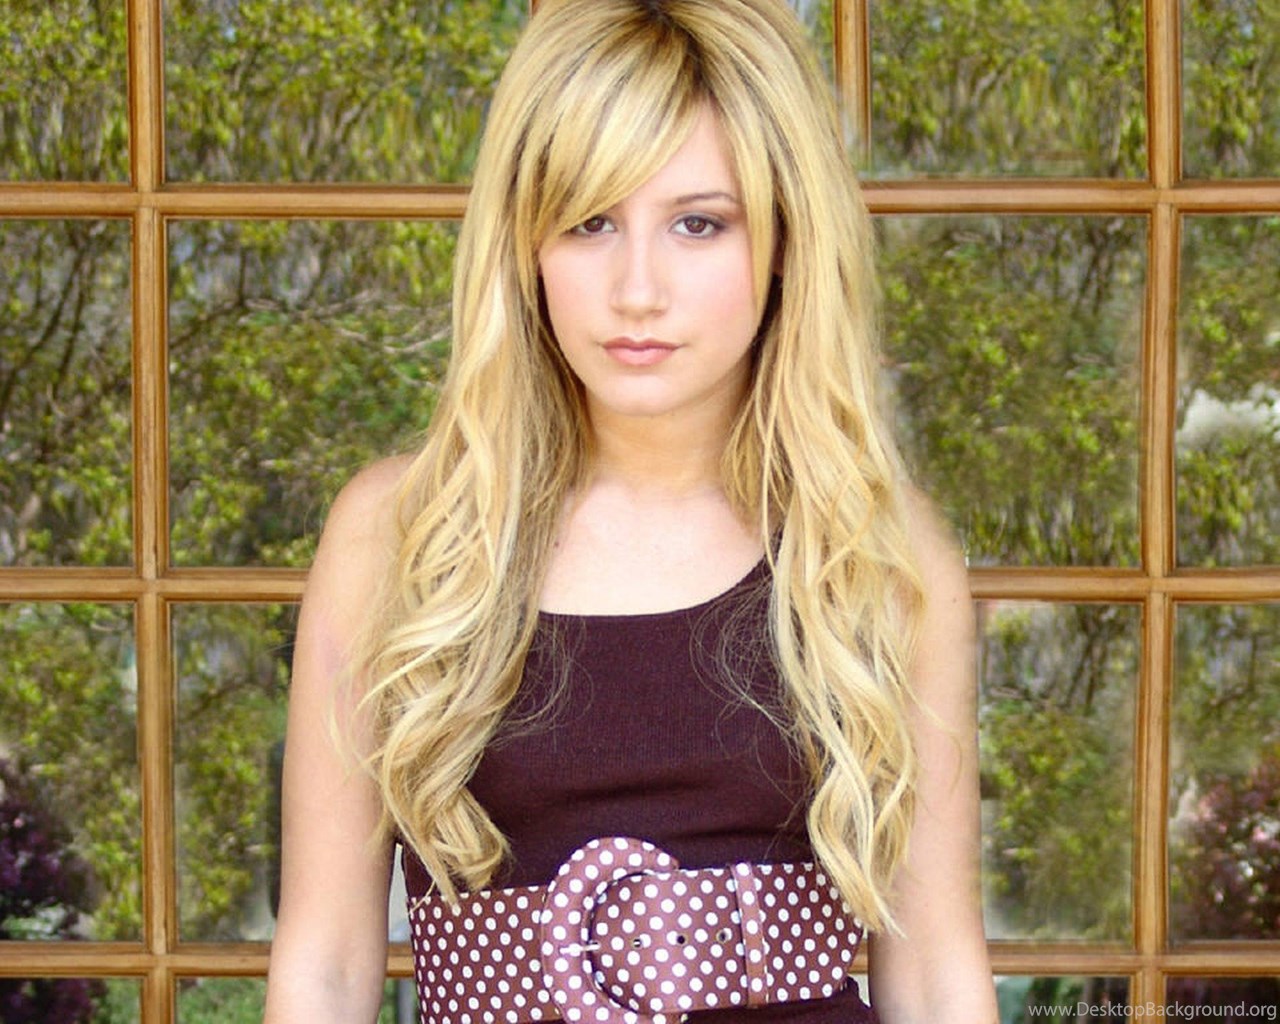 Download Ashley Tisdale Wallpapers For Desktop In HD 2015 Popular 1280x1024...